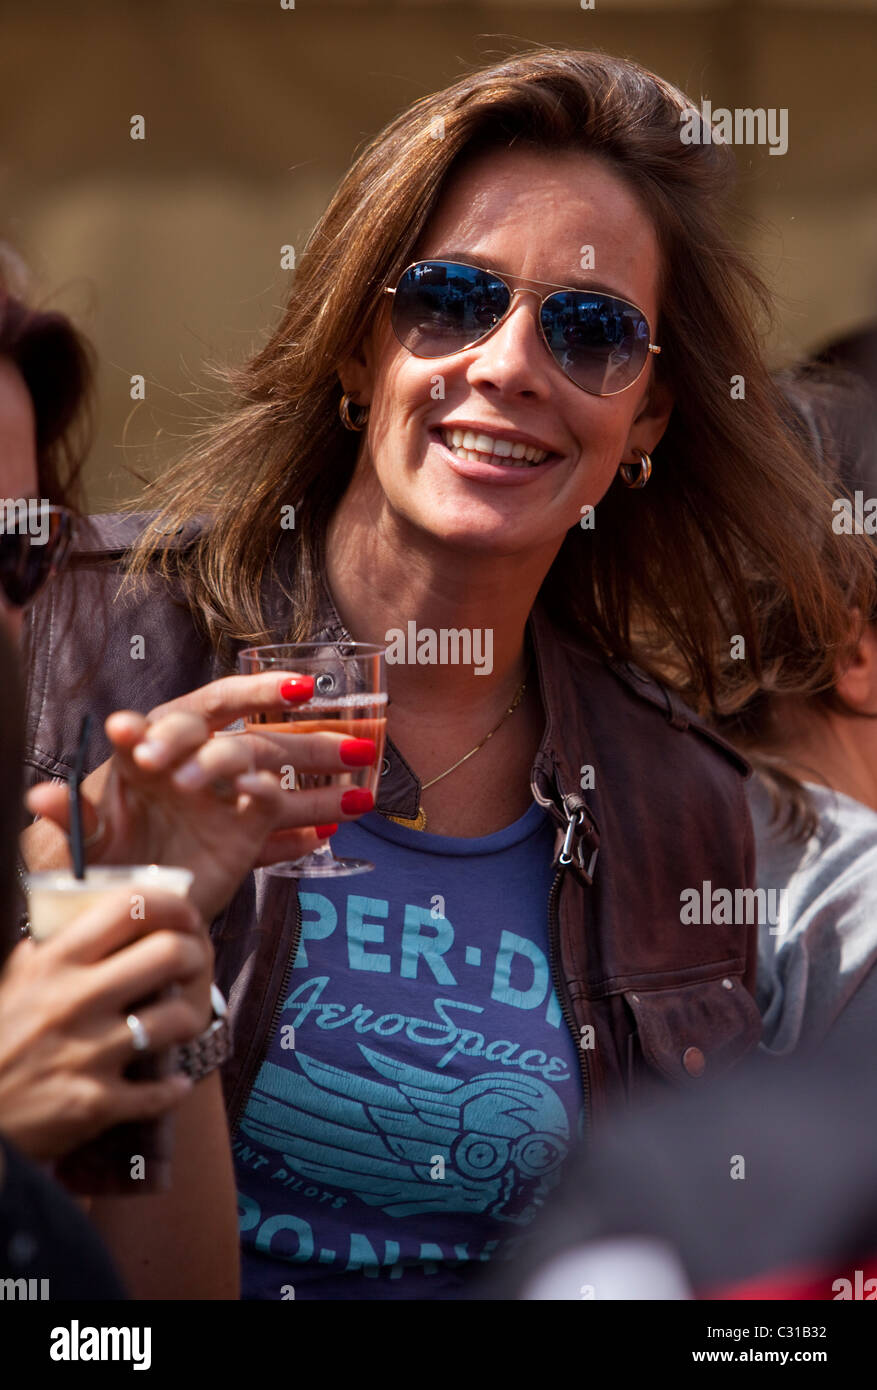 Portrait of a woman wearing sunglasses and holding a glass of wine, London, England, UK. Stock Photo